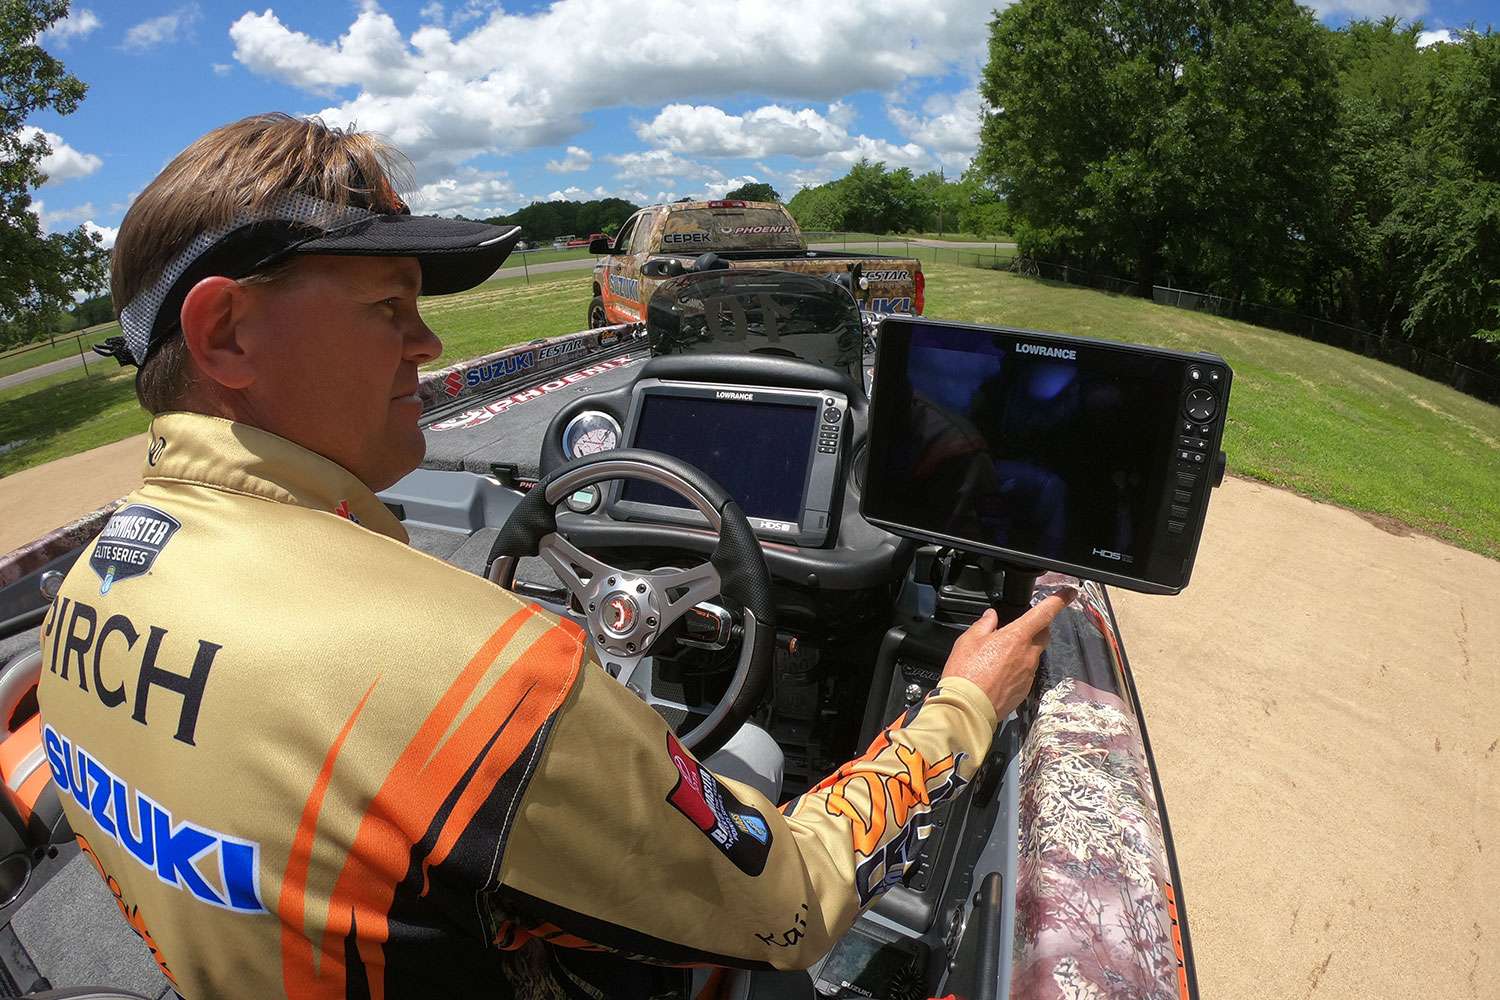 At his primary information center, you'll find two more Lowrance HDS units.